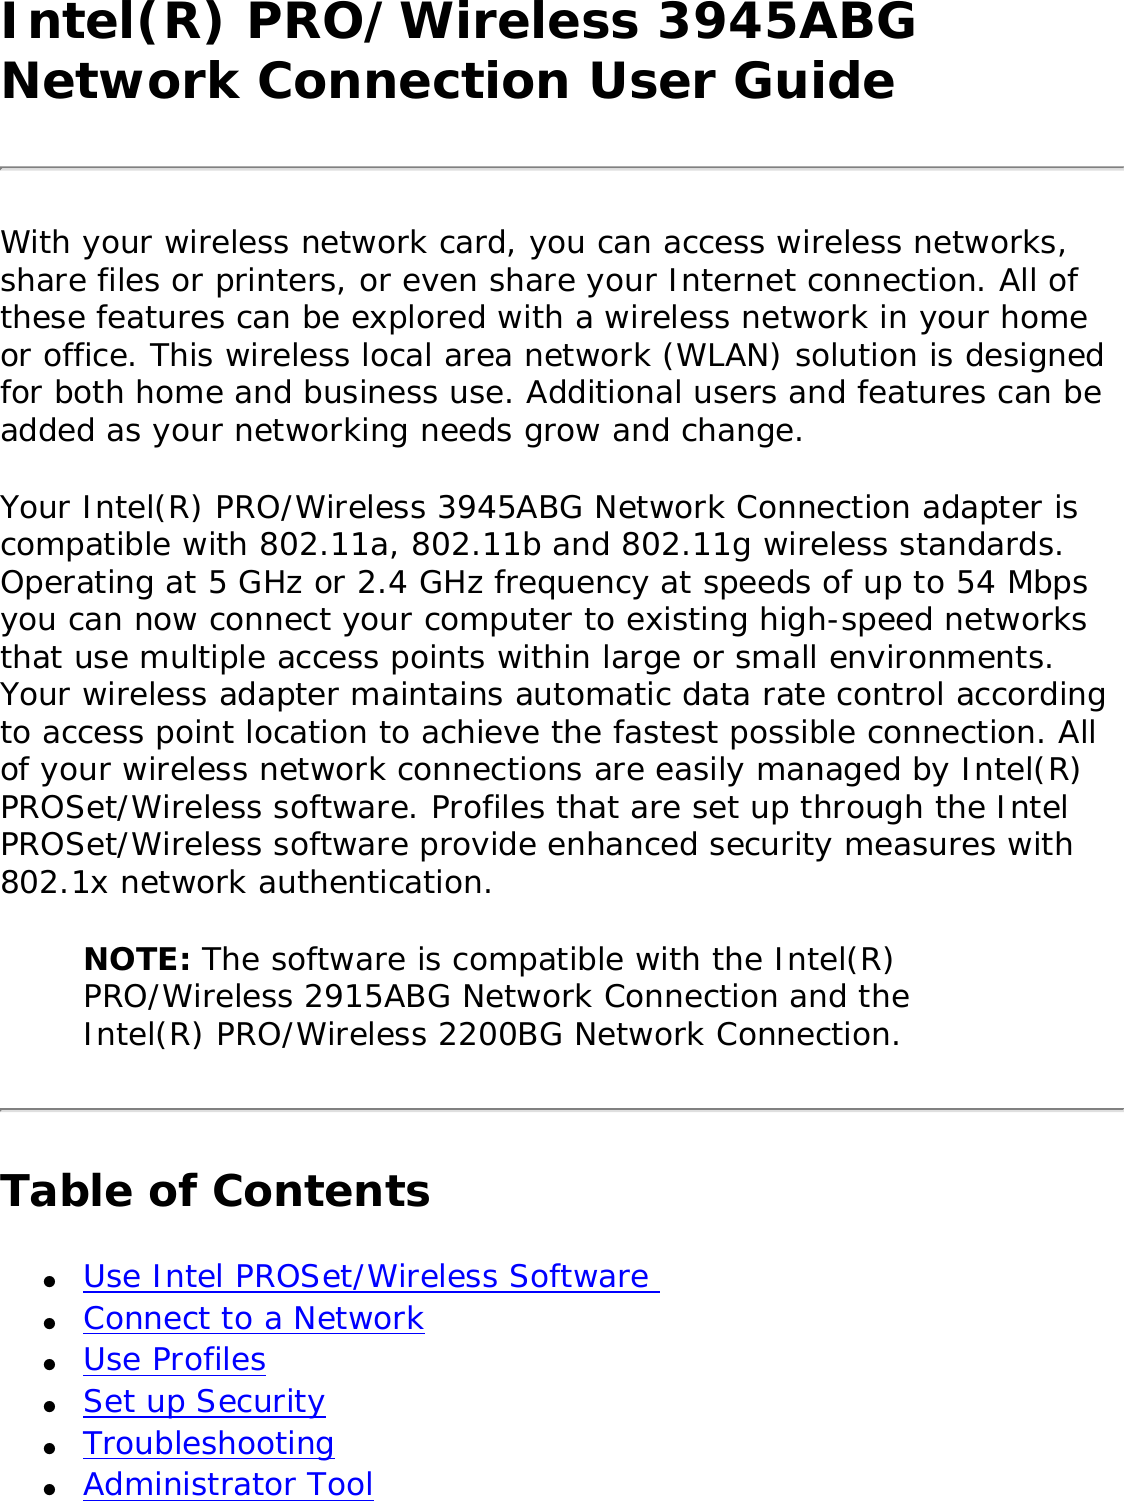 Intel(R) PRO/Wireless 3945ABG Network Connection User GuideWith your wireless network card, you can access wireless networks, share files or printers, or even share your Internet connection. All of these features can be explored with a wireless network in your home or office. This wireless local area network (WLAN) solution is designed for both home and business use. Additional users and features can be added as your networking needs grow and change. Your Intel(R) PRO/Wireless 3945ABG Network Connection adapter is compatible with 802.11a, 802.11b and 802.11g wireless standards. Operating at 5 GHz or 2.4 GHz frequency at speeds of up to 54 Mbps you can now connect your computer to existing high-speed networks that use multiple access points within large or small environments. Your wireless adapter maintains automatic data rate control according to access point location to achieve the fastest possible connection. All of your wireless network connections are easily managed by Intel(R) PROSet/Wireless software. Profiles that are set up through the Intel PROSet/Wireless software provide enhanced security measures with 802.1x network authentication. NOTE: The software is compatible with the Intel(R) PRO/Wireless 2915ABG Network Connection and the Intel(R) PRO/Wireless 2200BG Network Connection.Table of Contents●     Use Intel PROSet/Wireless Software ●     Connect to a Network ●     Use Profiles ●     Set up Security●     Troubleshooting ●     Administrator Tool